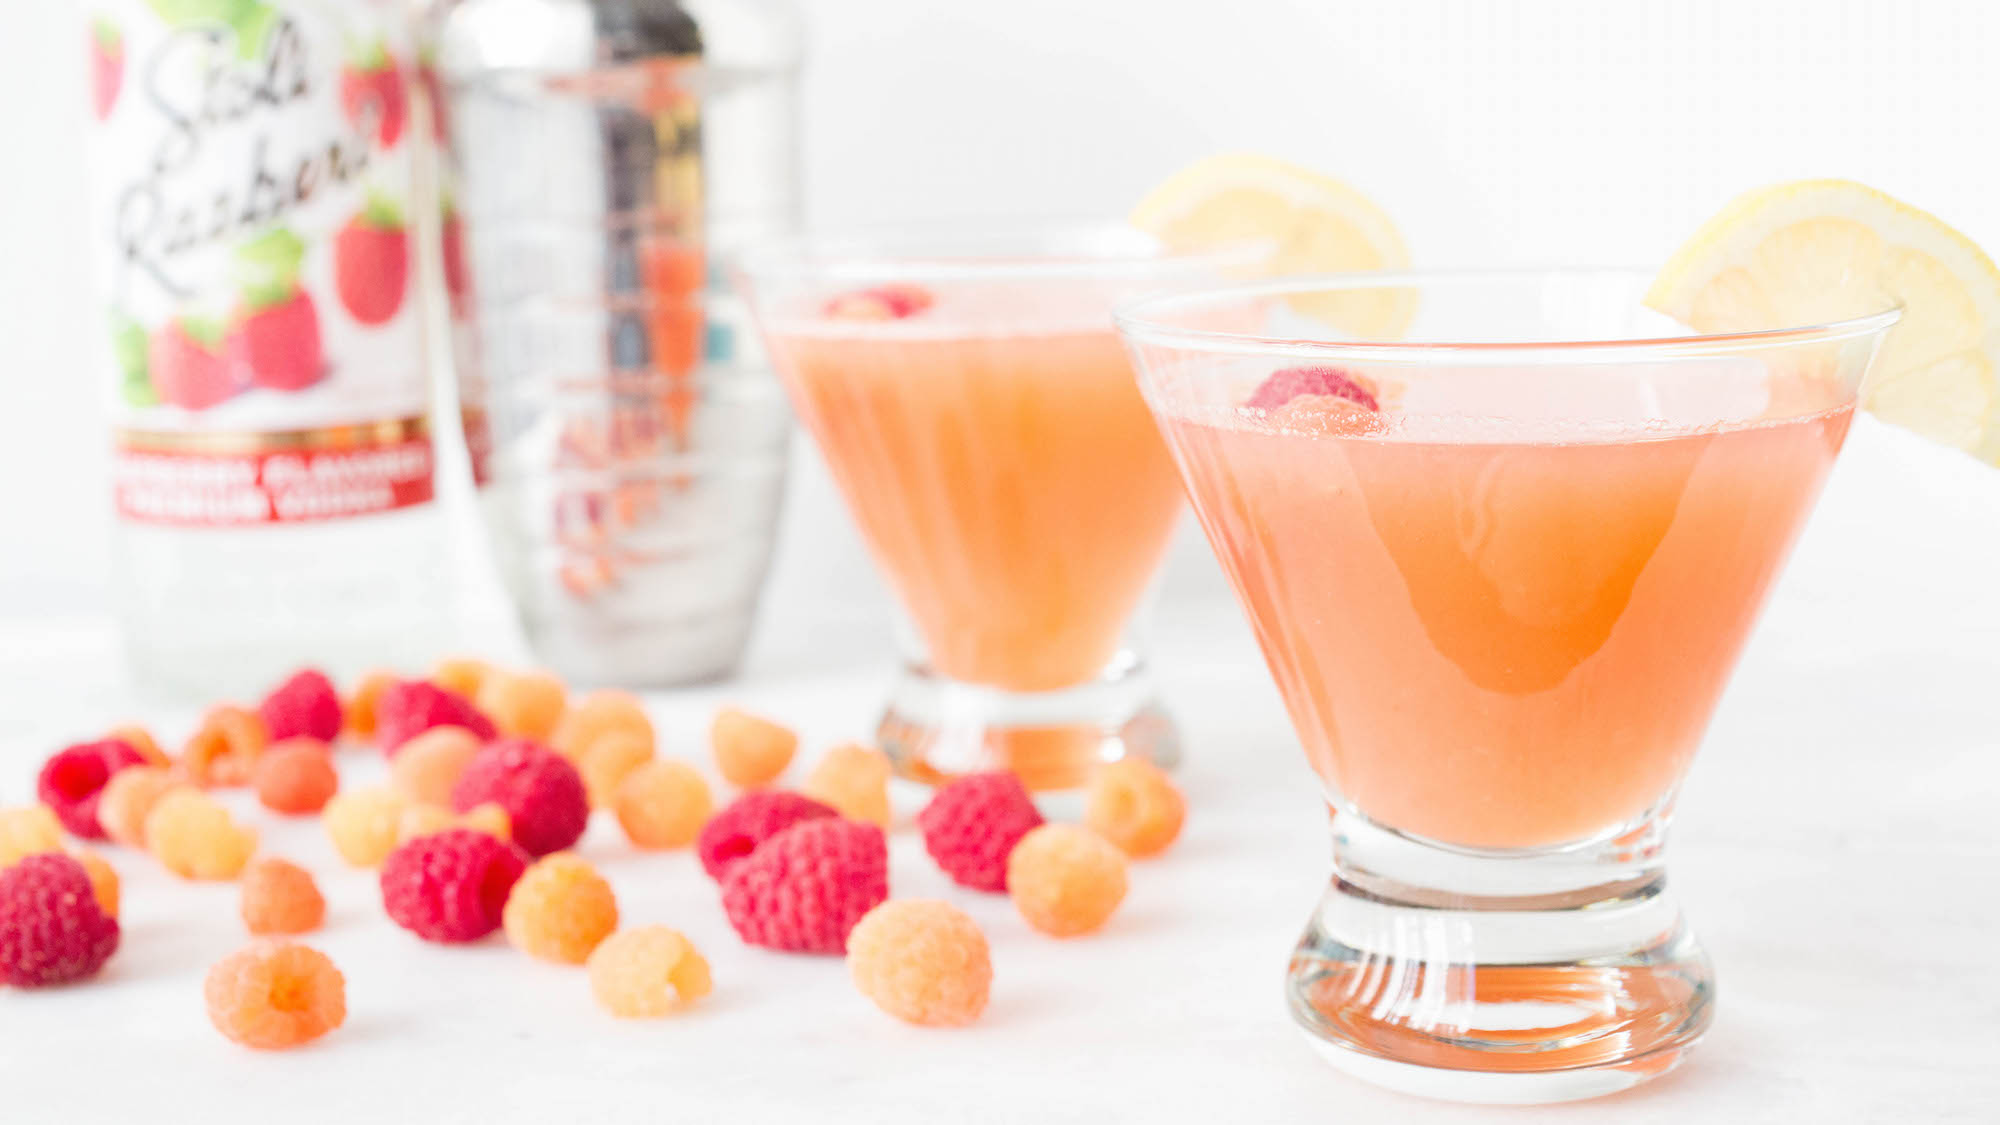 Two stemless martini glasses are on a white background. They contain pink lemonade raspberry cocktails. Pink and red raspberries are arranged around the glasses. A bottle of raspberry vodka and metal shaker are out of focus in the background.